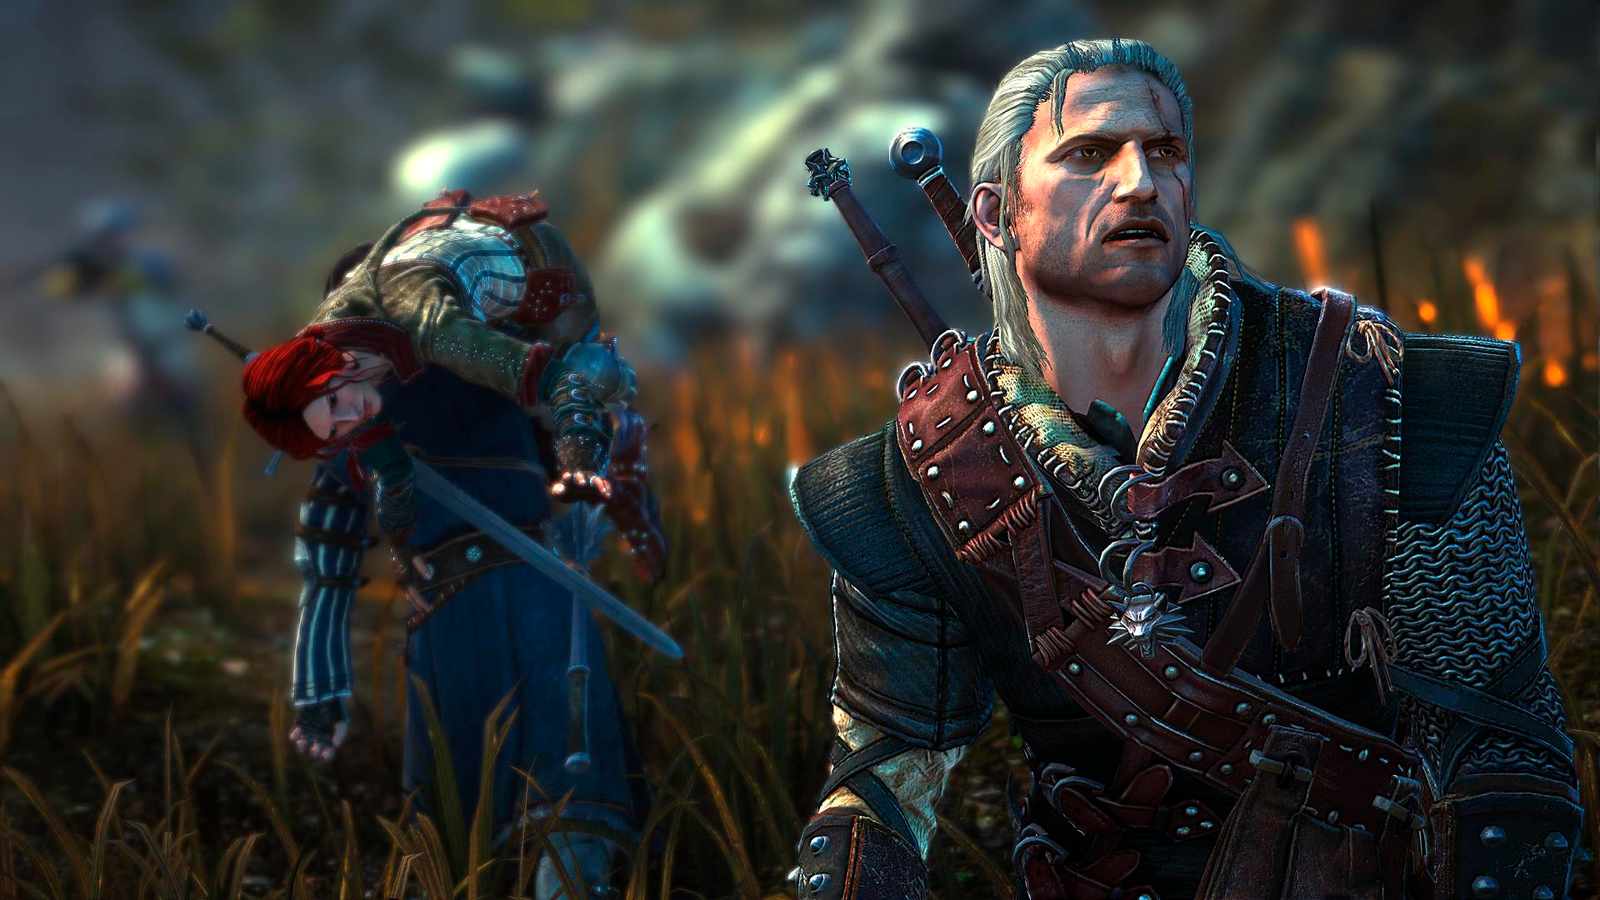 the witcher 2